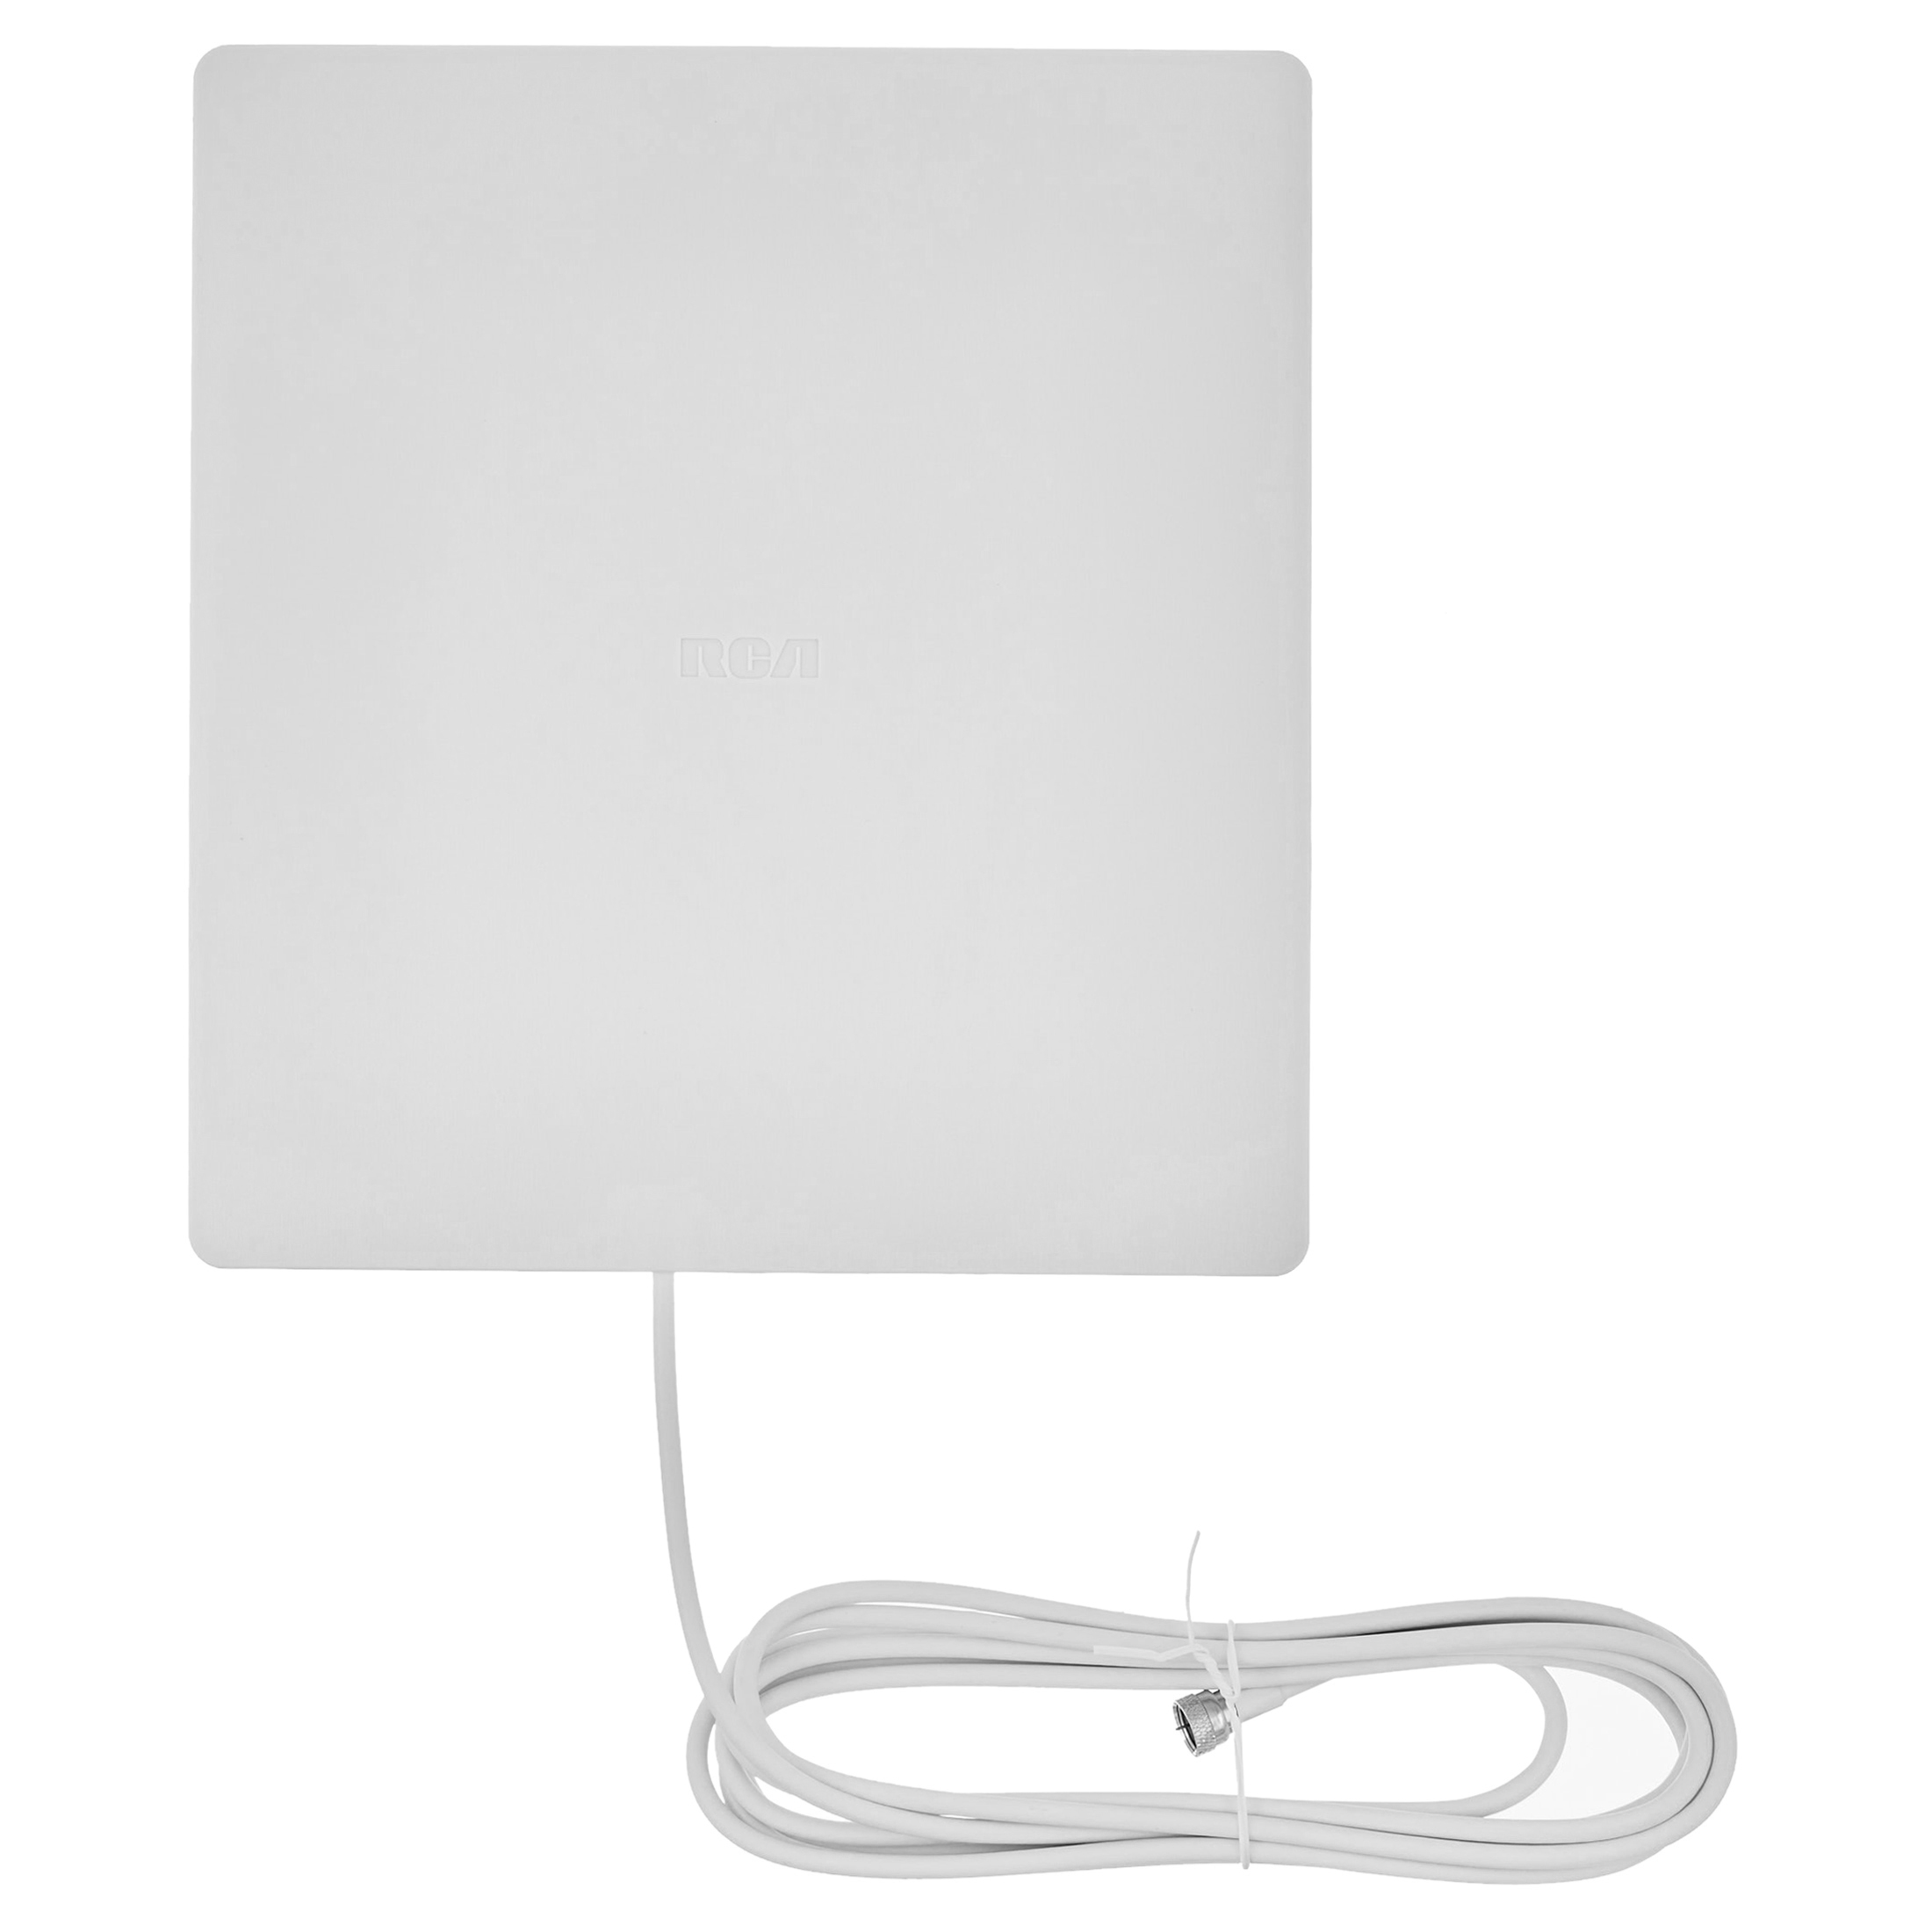 RCA Indoor Flat HDTV Antenna - Multi-Directional - image 4 of 8